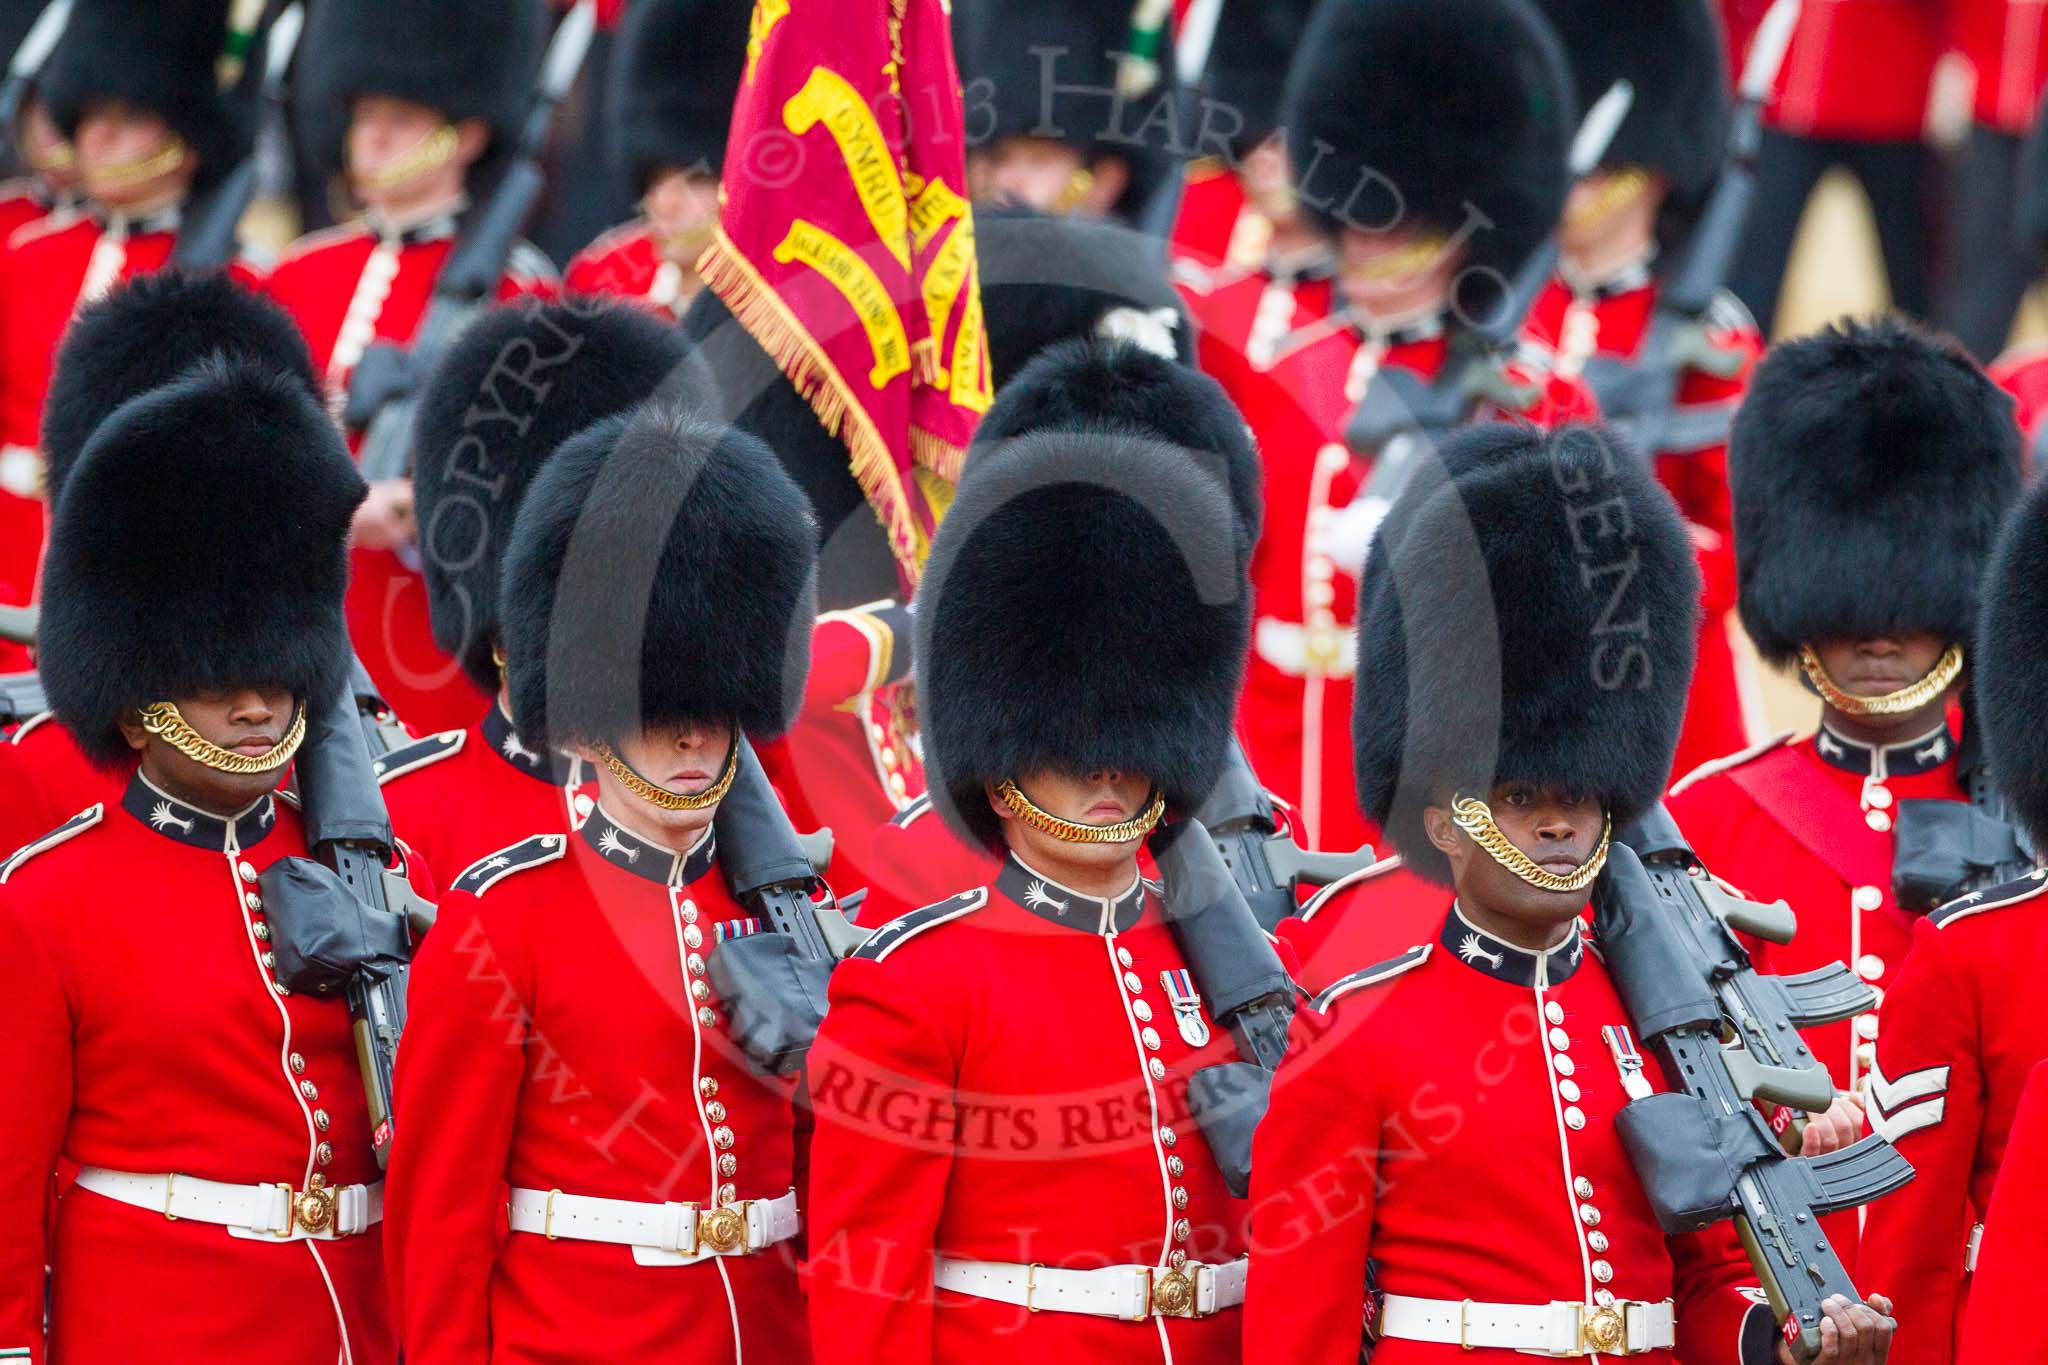 Trooping the Colour 2015. Image #443, 13 June 2015 11:33 Horse Guards Parade, London, UK